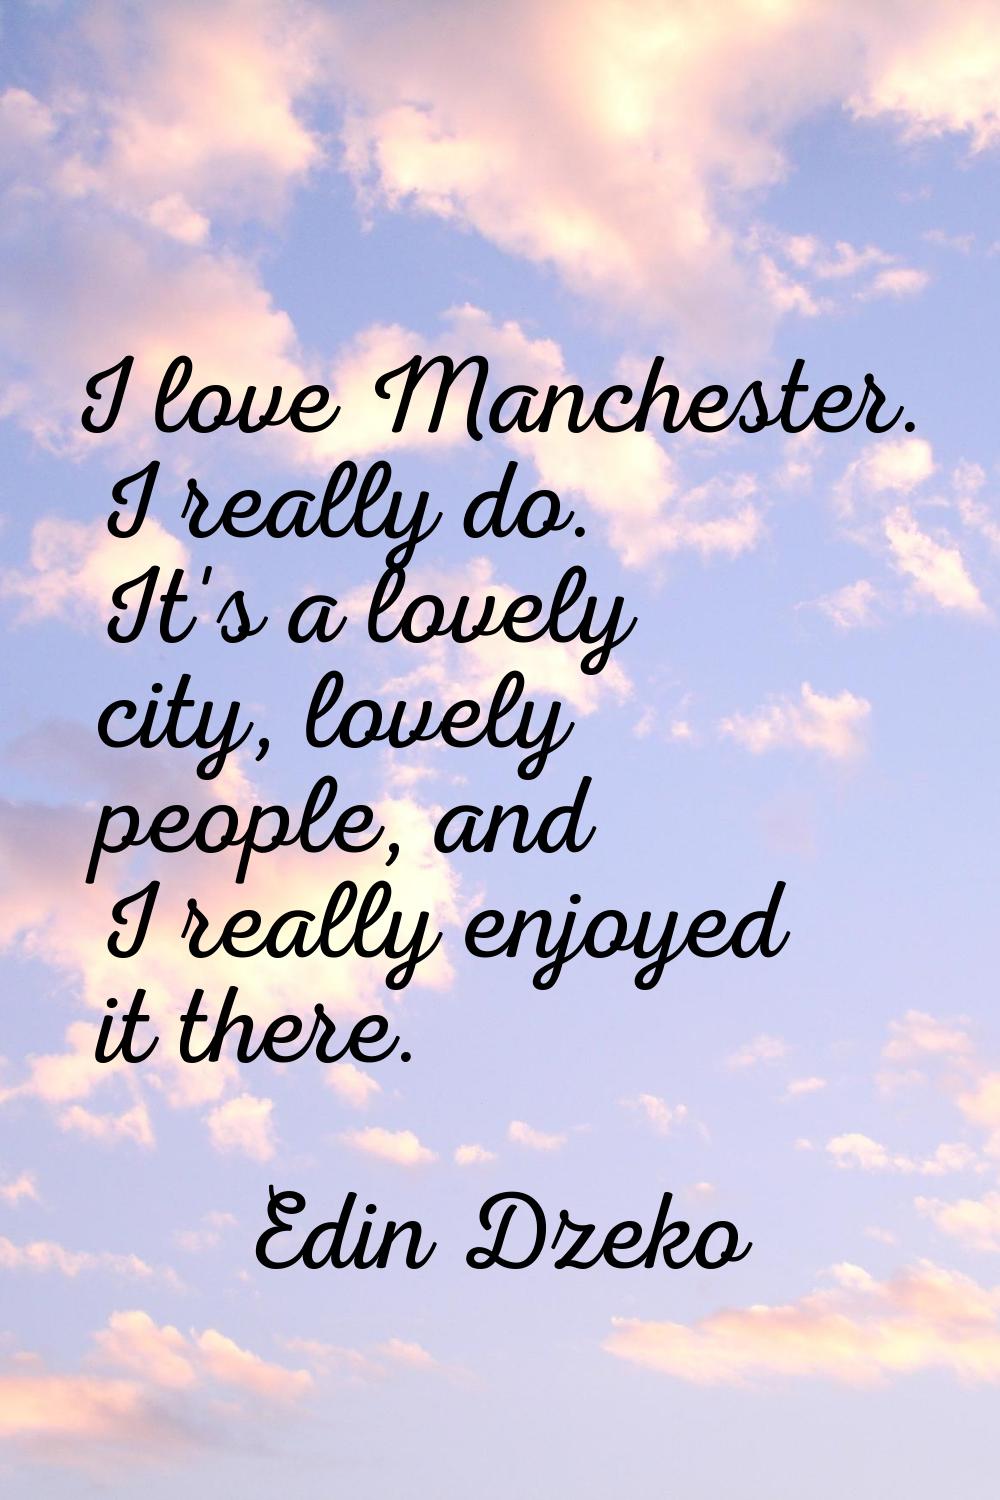 I love Manchester. I really do. It's a lovely city, lovely people, and I really enjoyed it there.